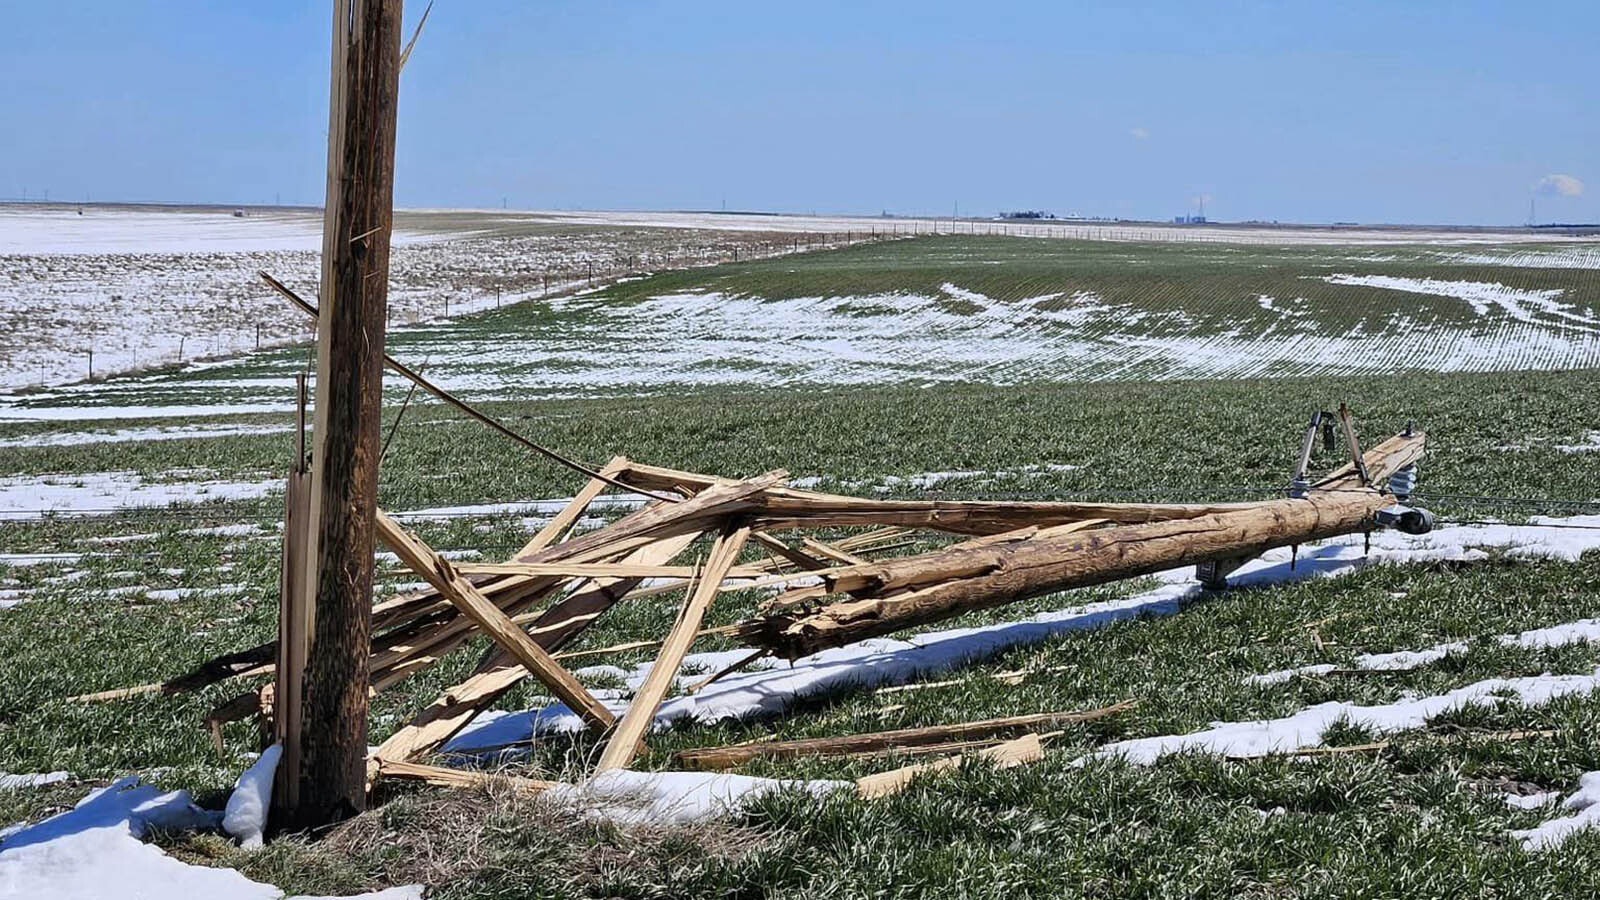 High West Energy in Pine Bluffs, Wyoming, has spent nearly two weeks repairing hundreds of power poles downed by a strong spring snowstorm across eastern Wyoming and western Nebraska.